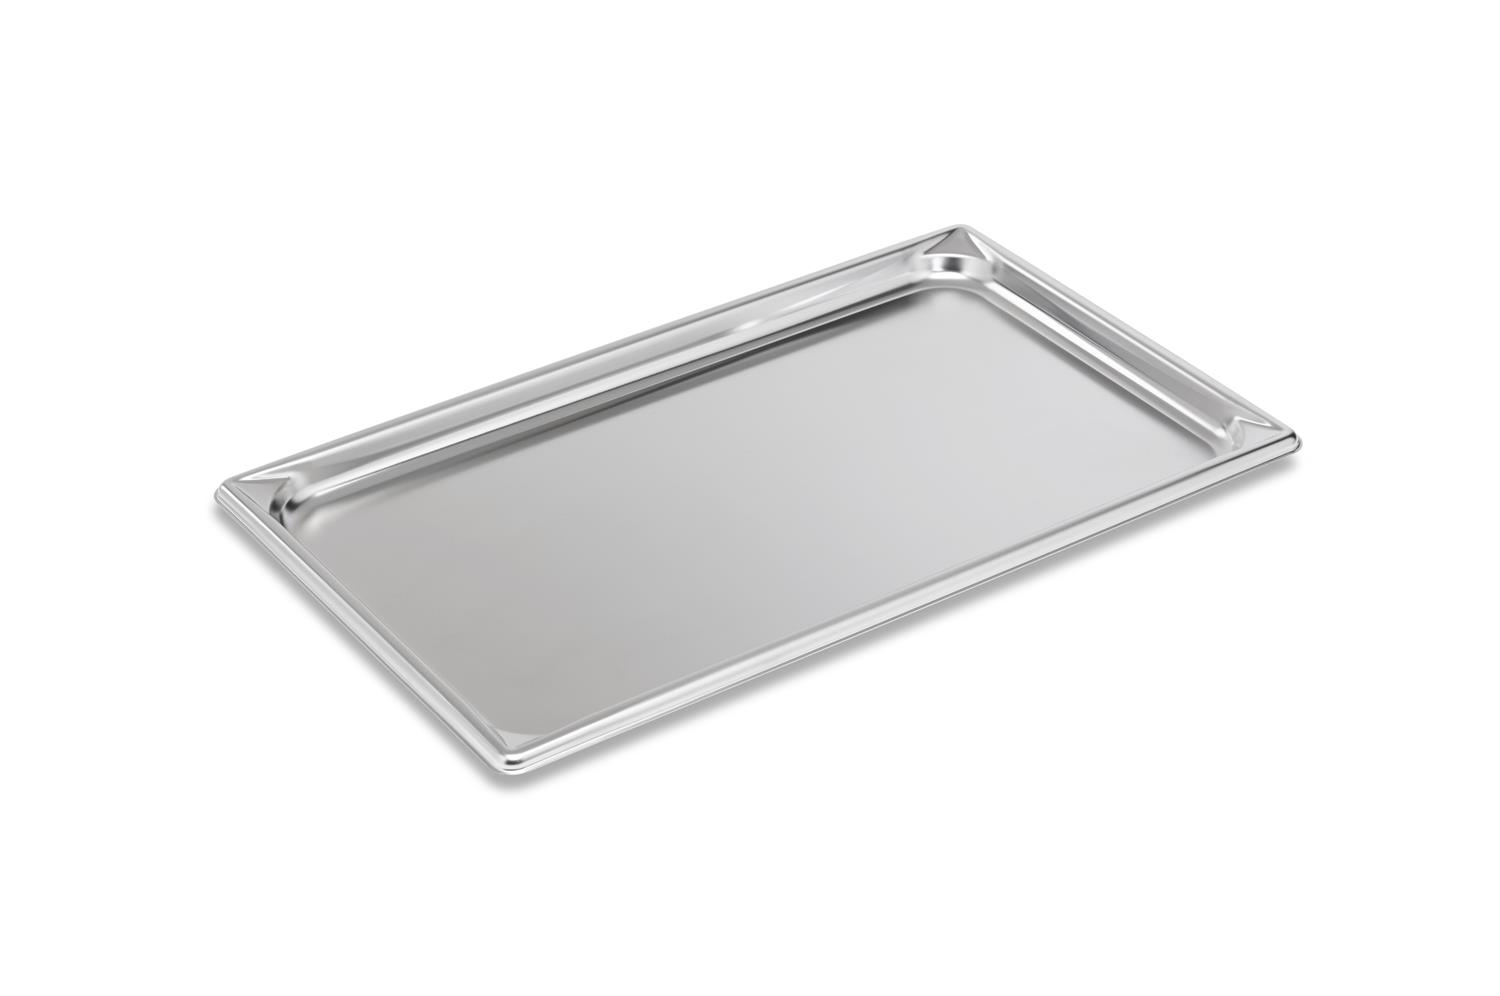 Vollrath 30002 Super Pan V Full Size Stainless Steel Steam Table Pan, 0.75"